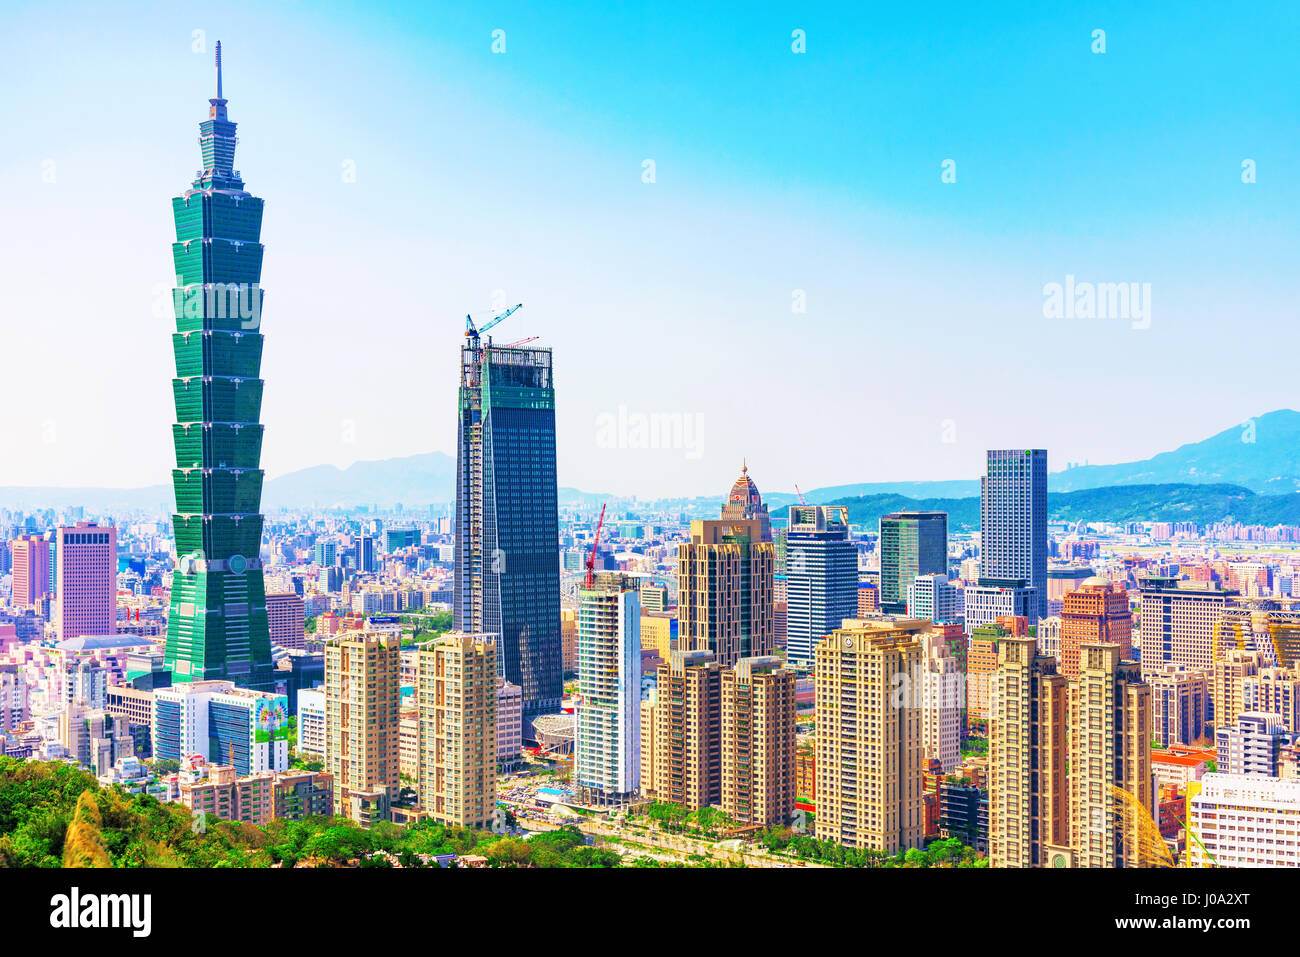 TAIPEI, TAIWAN - MARCH 24: This is a view of Xinyi financial district and the Taipei 101 building taken from Elephant mountain on March 24, 2017 in Ta Stock Photo